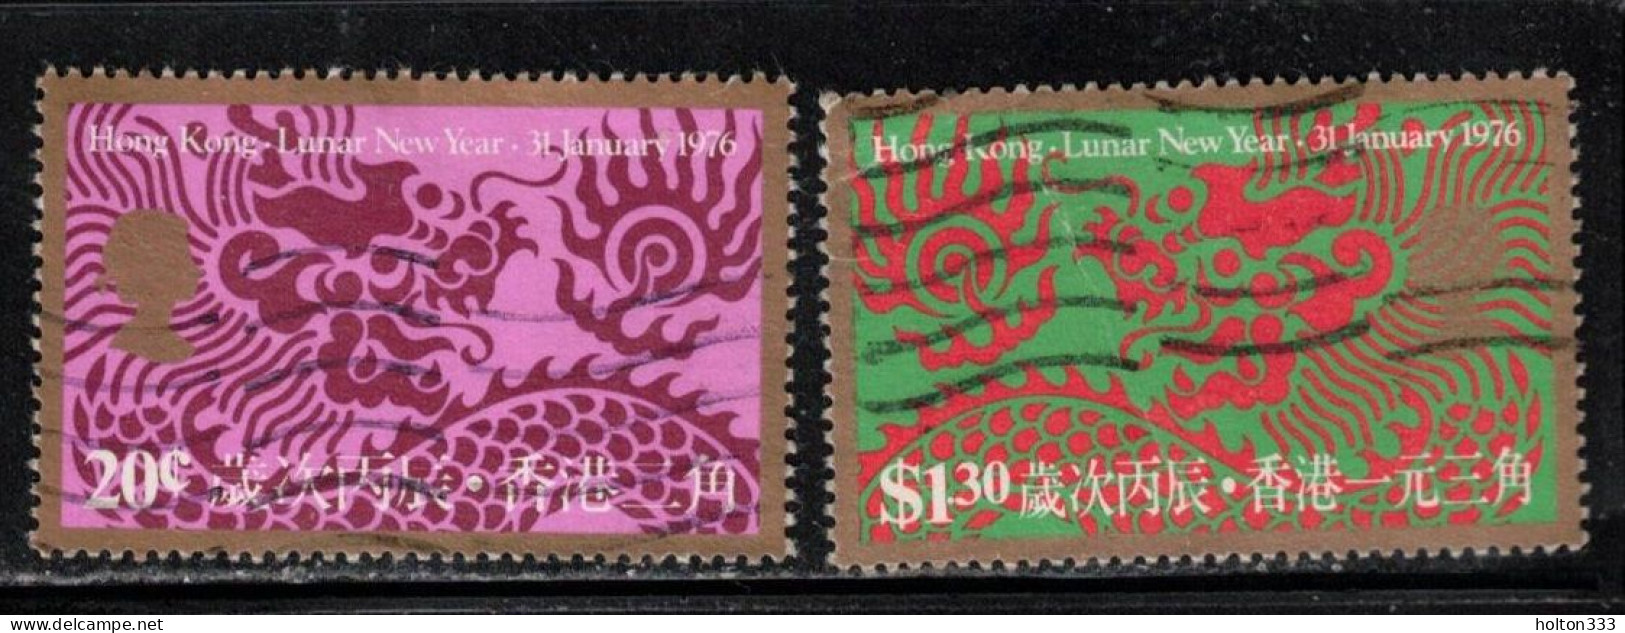 HONG KONG Scott # 312-13 Used - Lunar New Year 1976 - Used Stamps